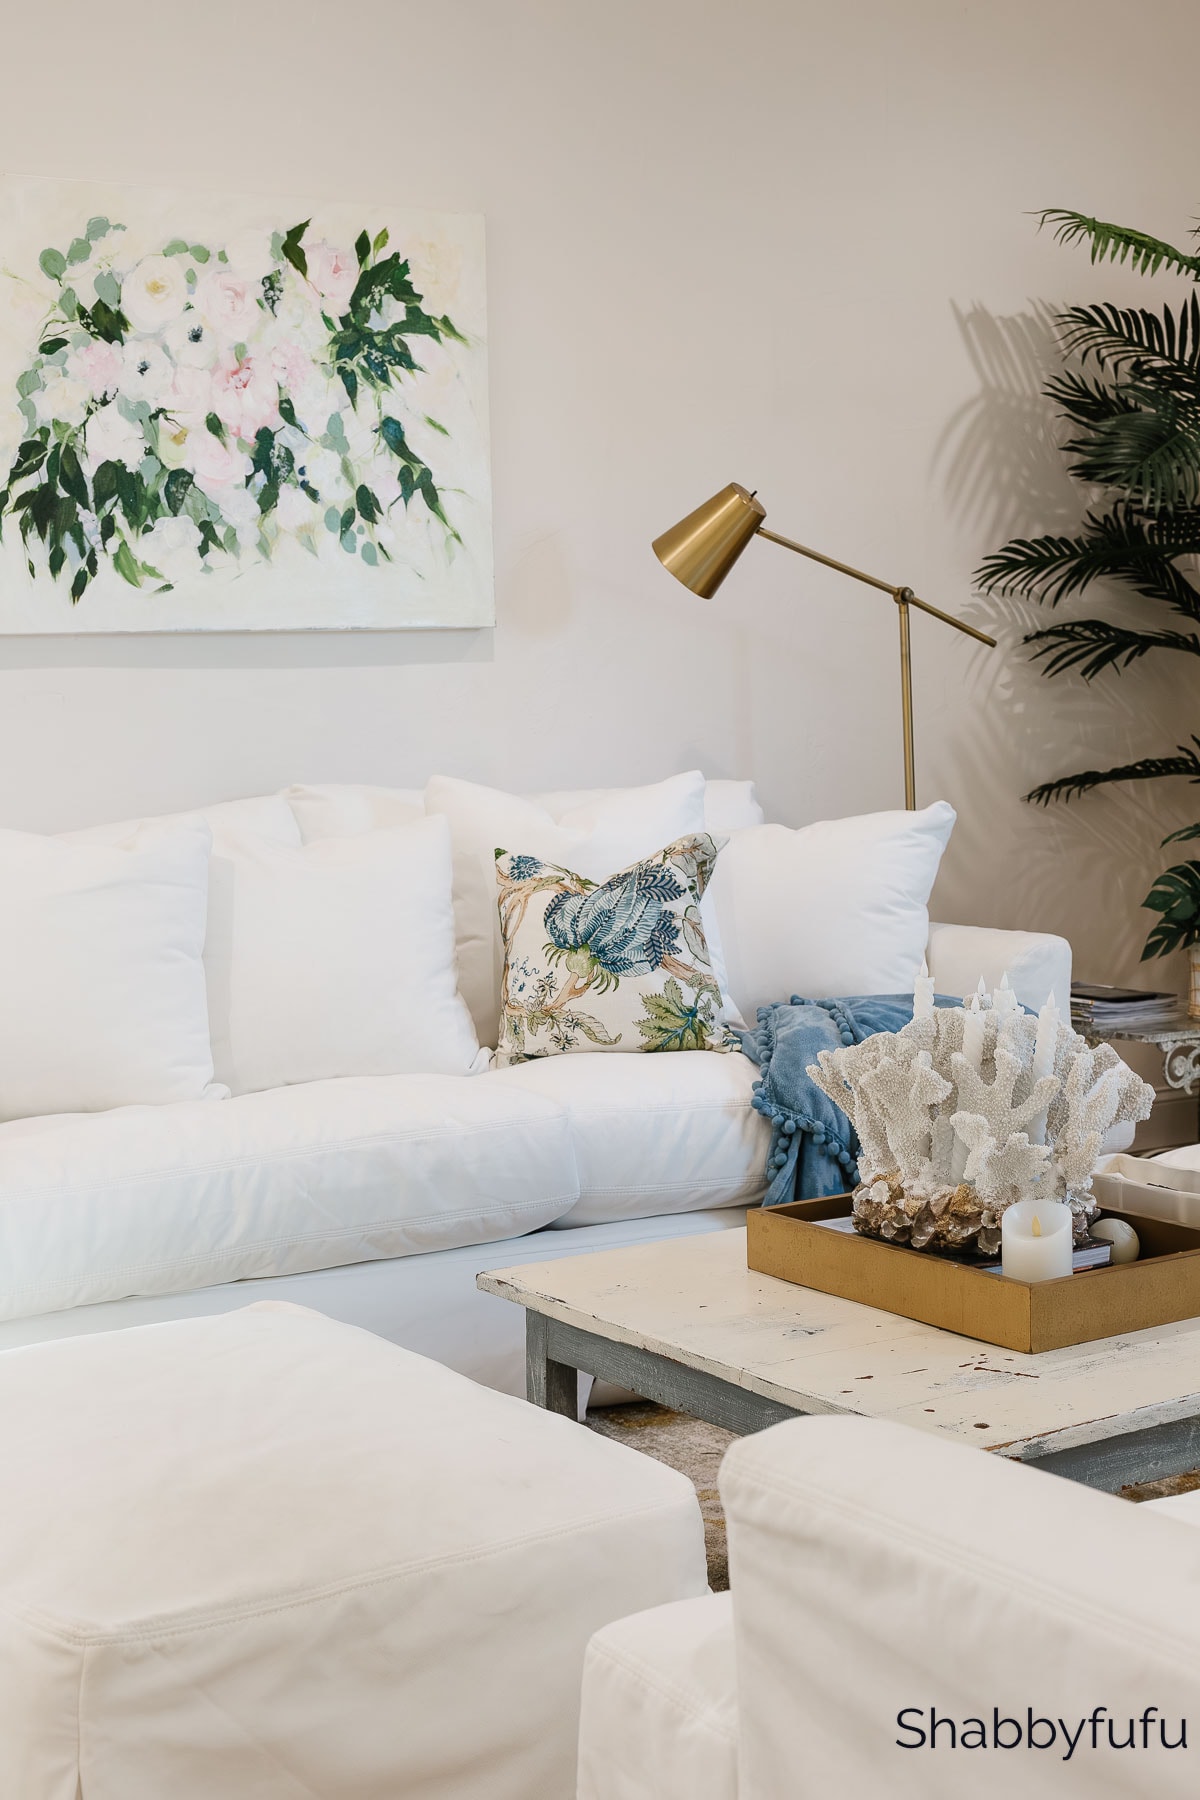 White Decorating Tips: How to Live in an All-White Decor Home